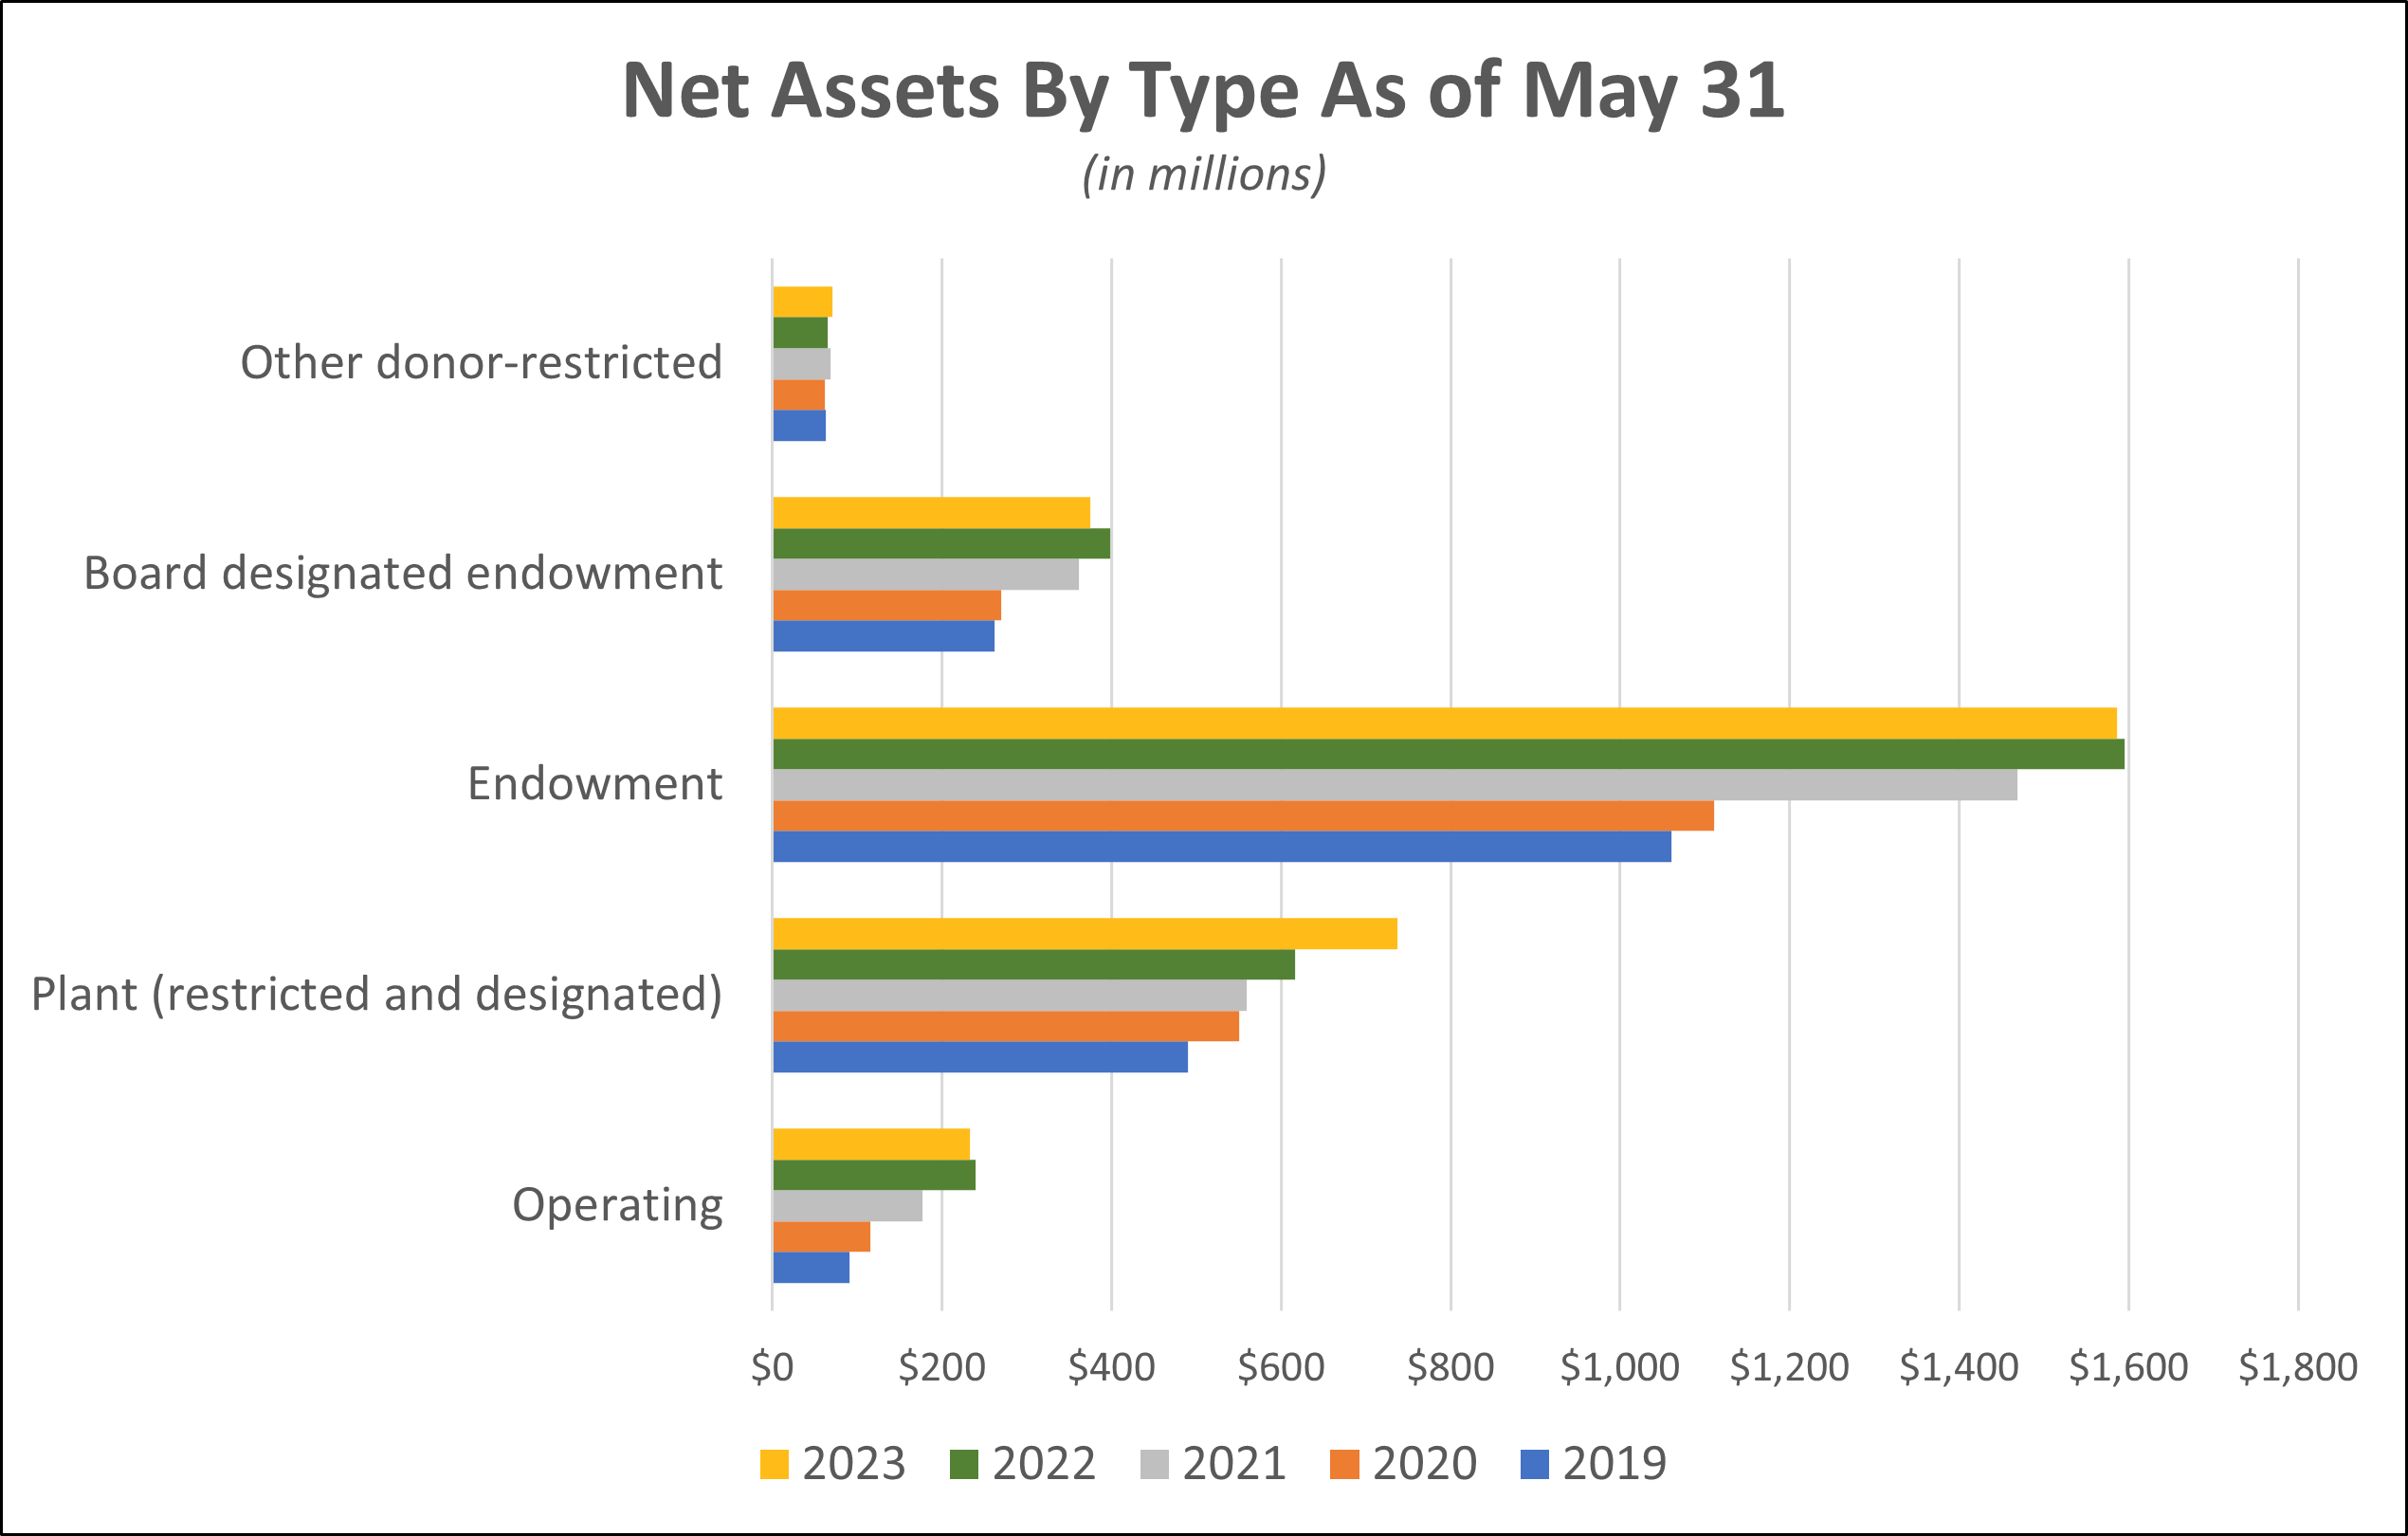 Net Assets By Type As of May 31